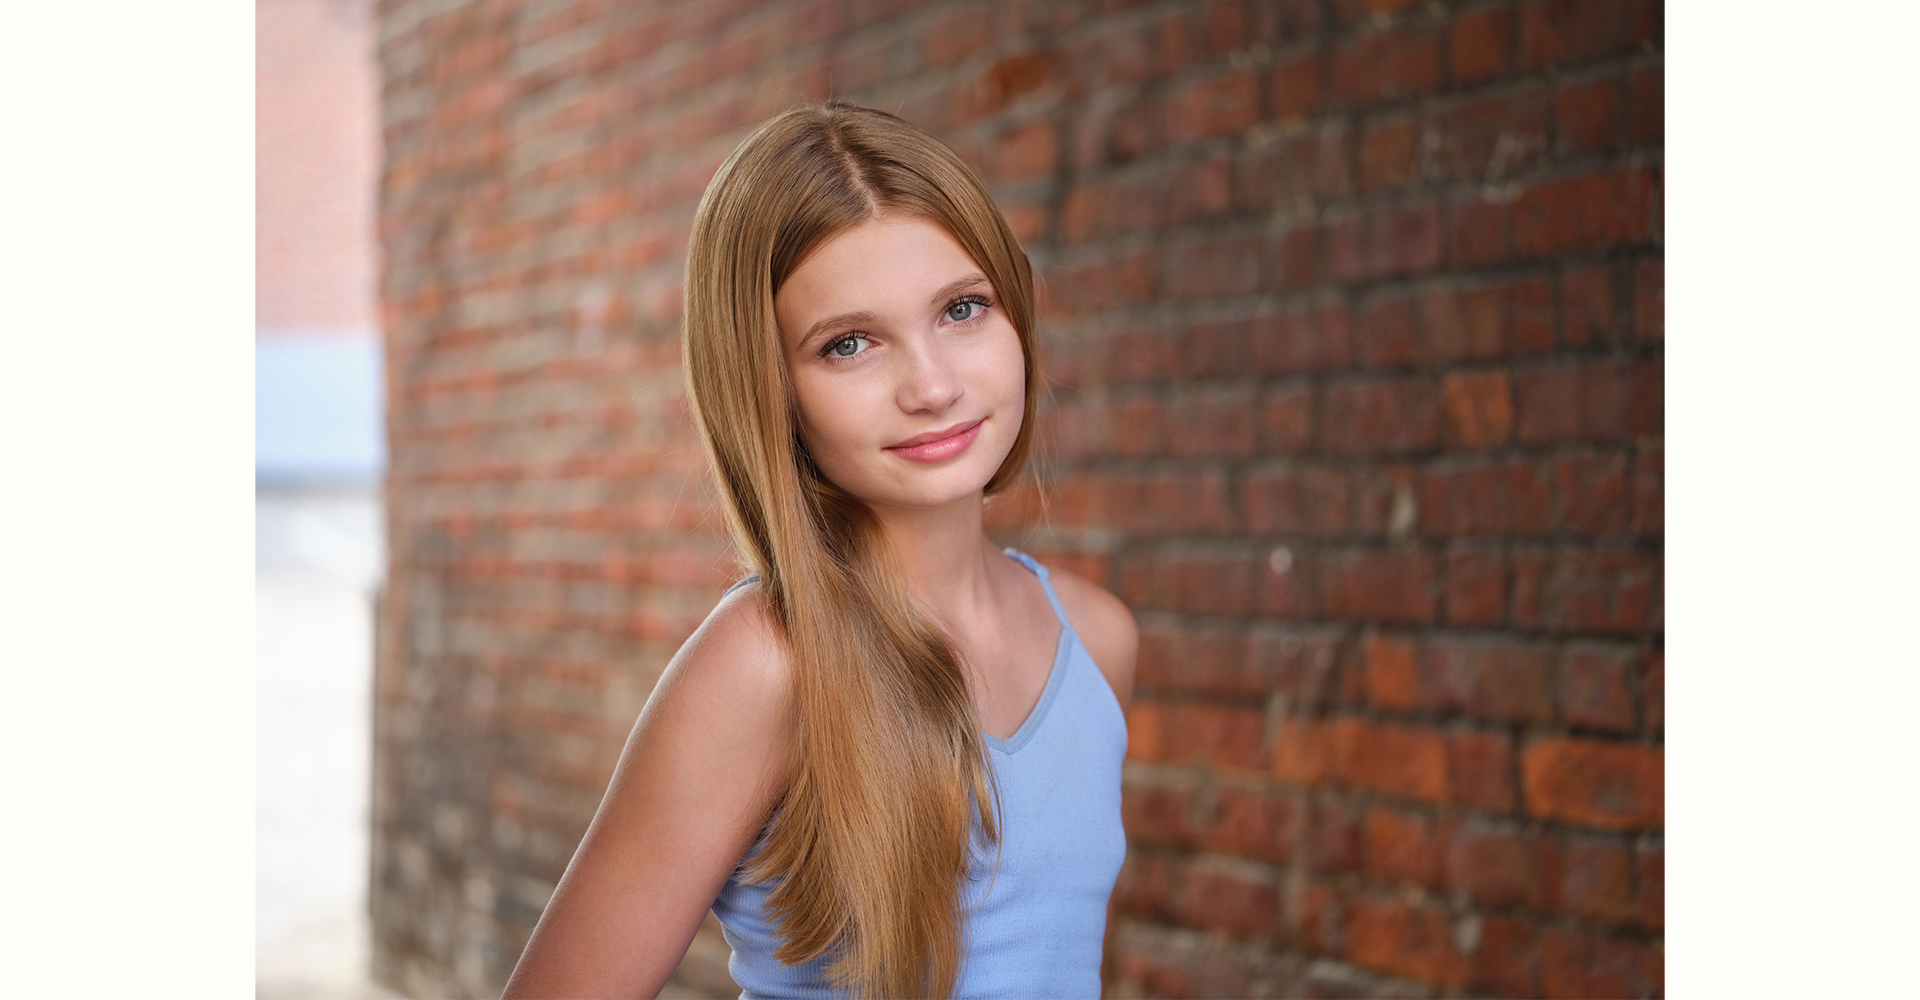 Teenage girl with long blonde hair headshot portrait front of brick wall